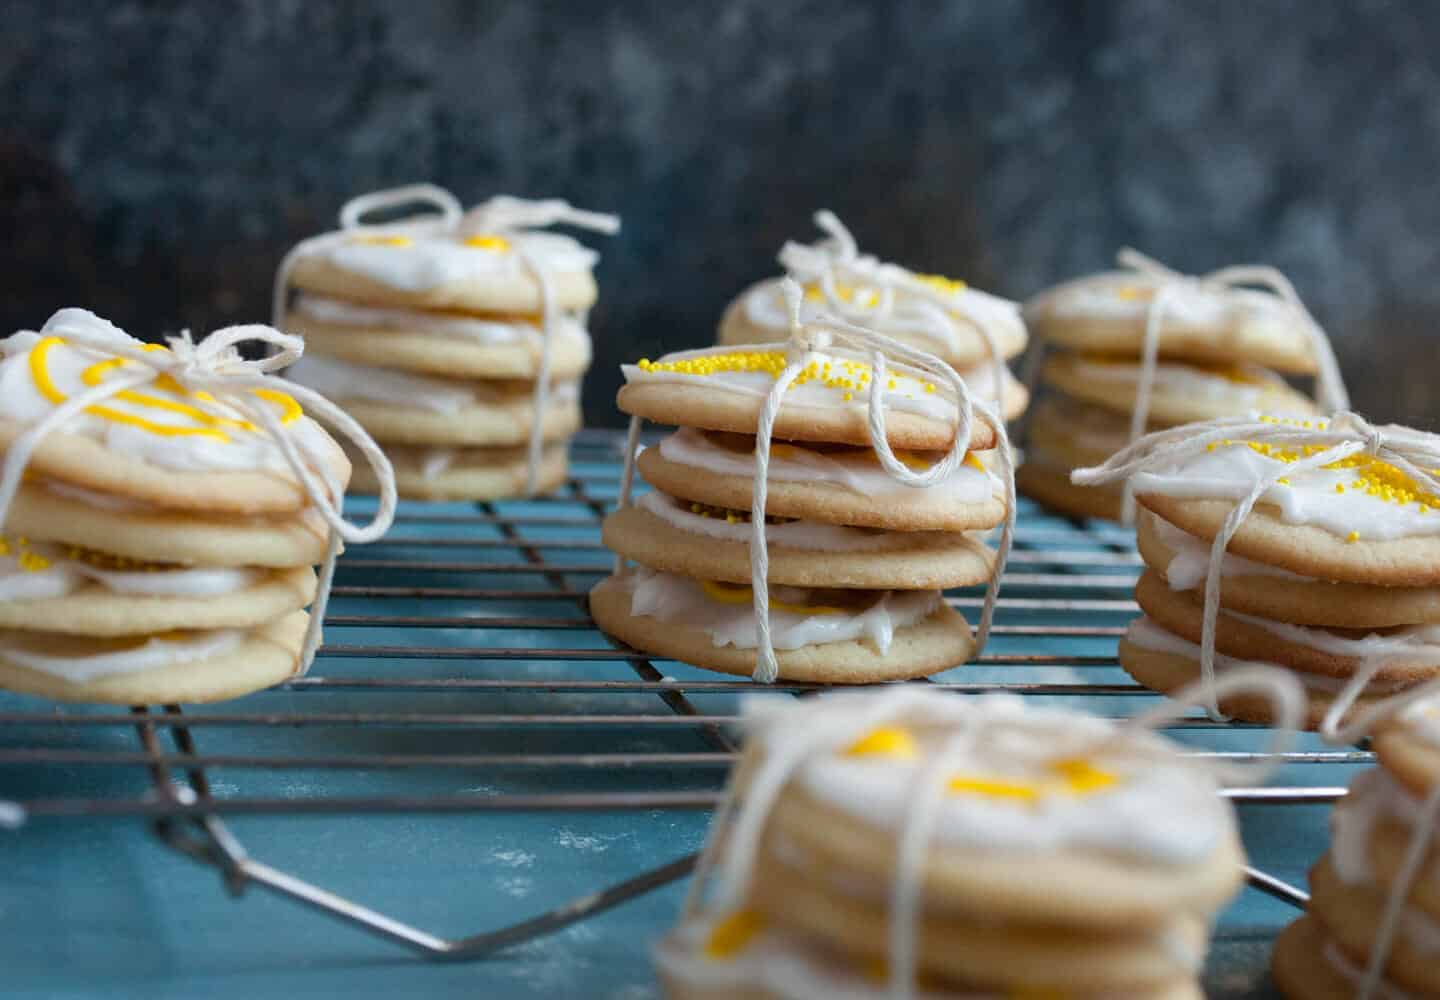 Lemon Butter Cookie Holiday Bundles: These little bundles of perfect lemon butter cookies will brighten any day. Make them for family, friends, or anyone how needs a pick-me-up! | macheesmo.com